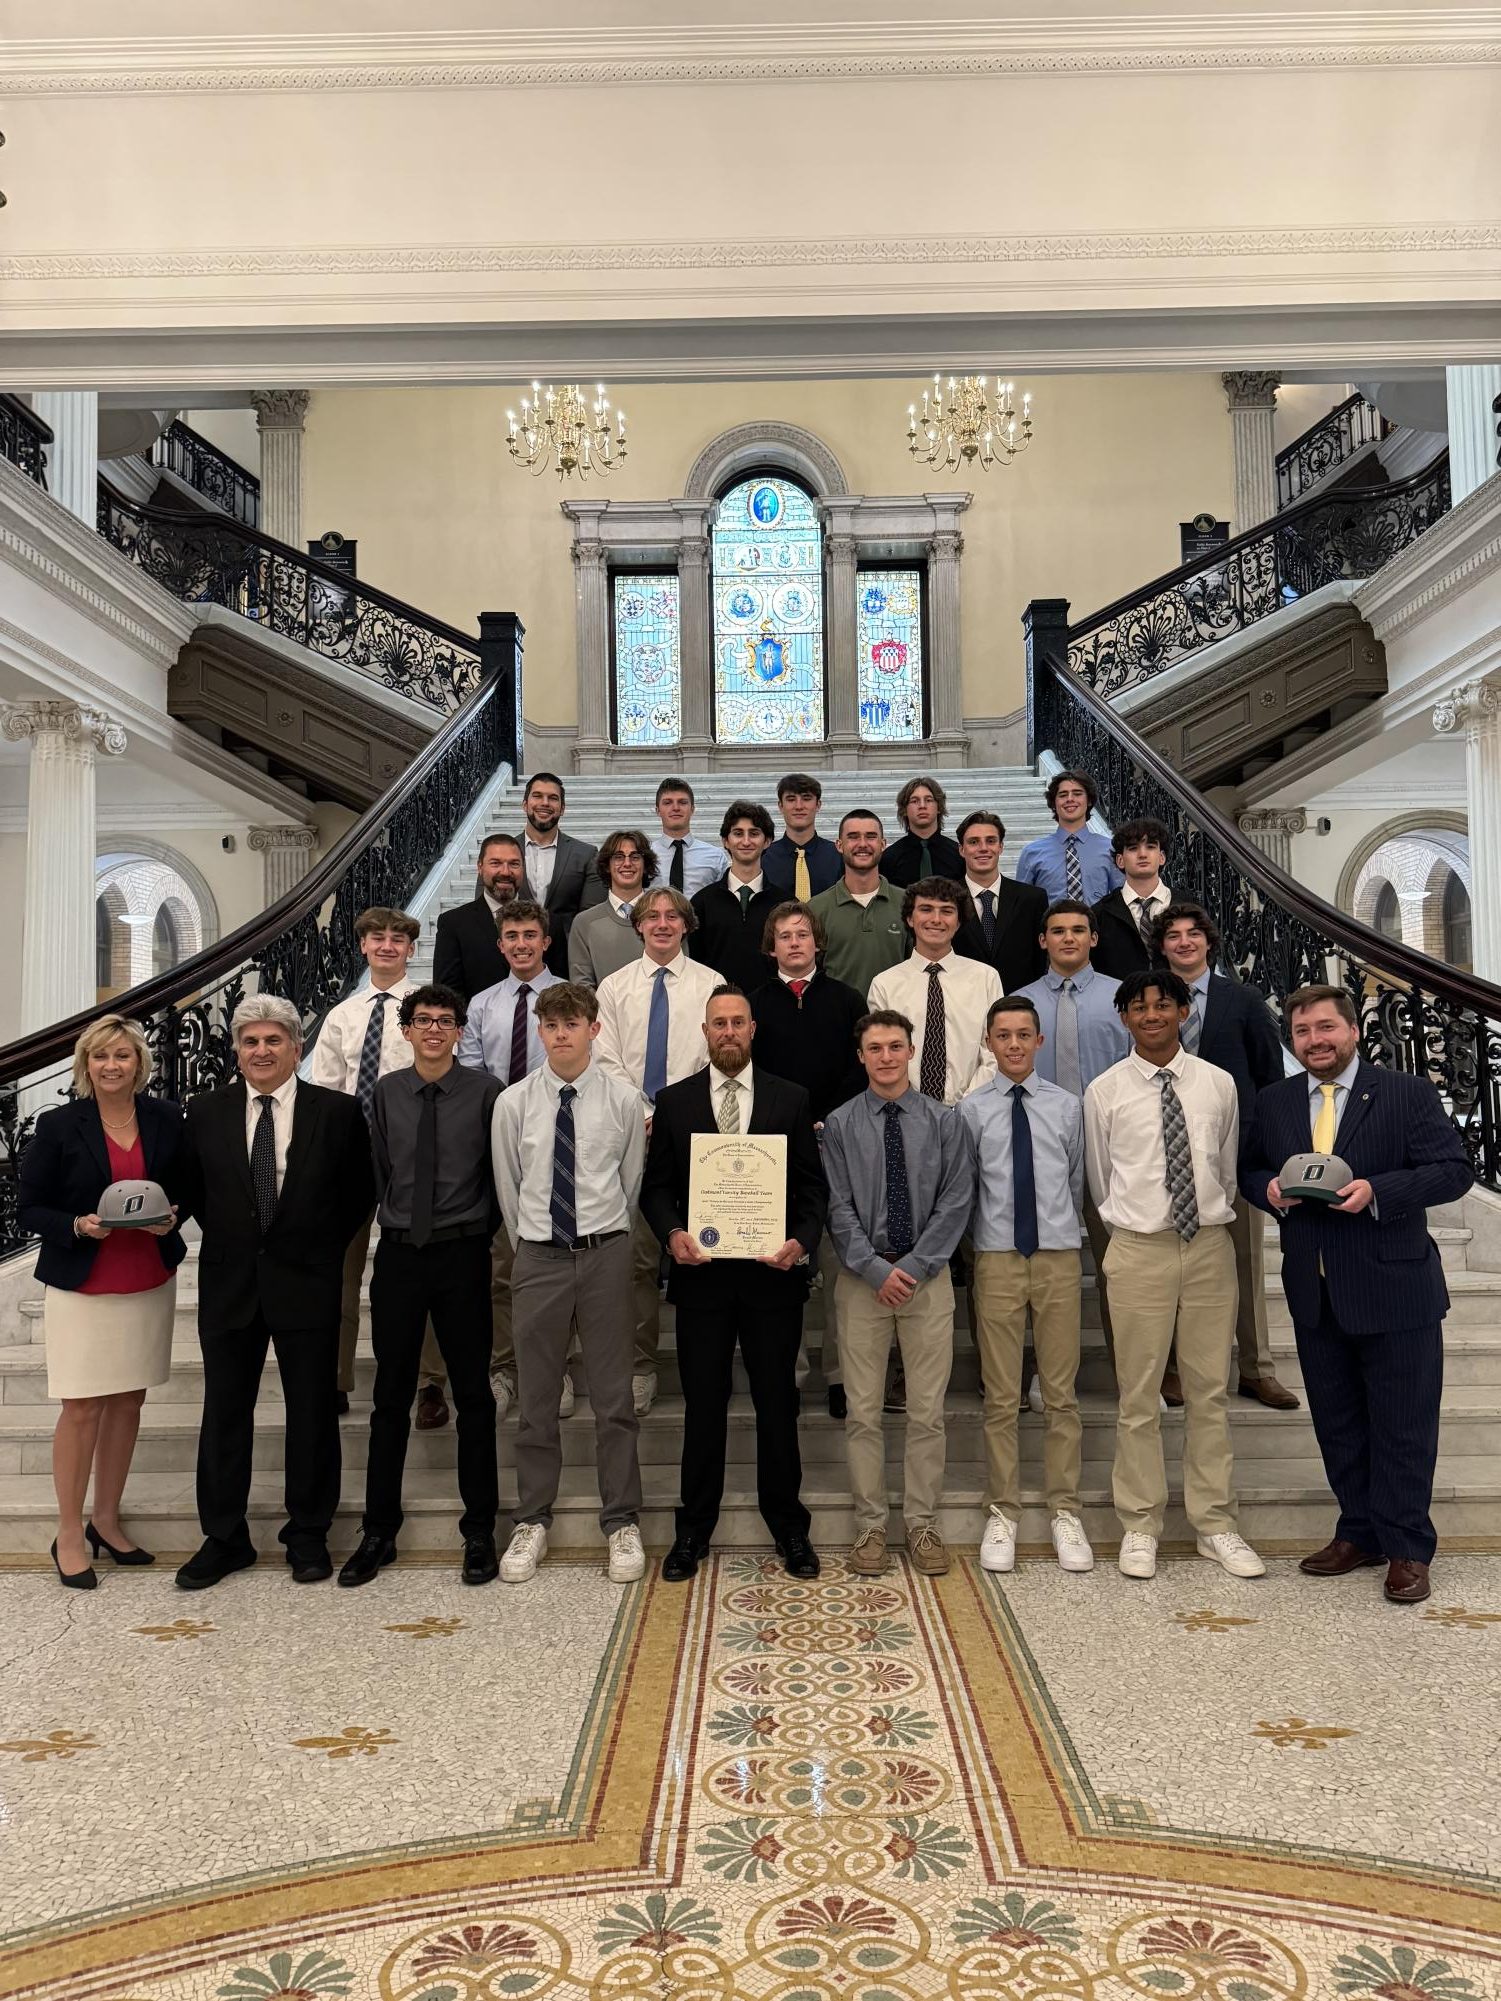 STATE Champions visit the STATE House